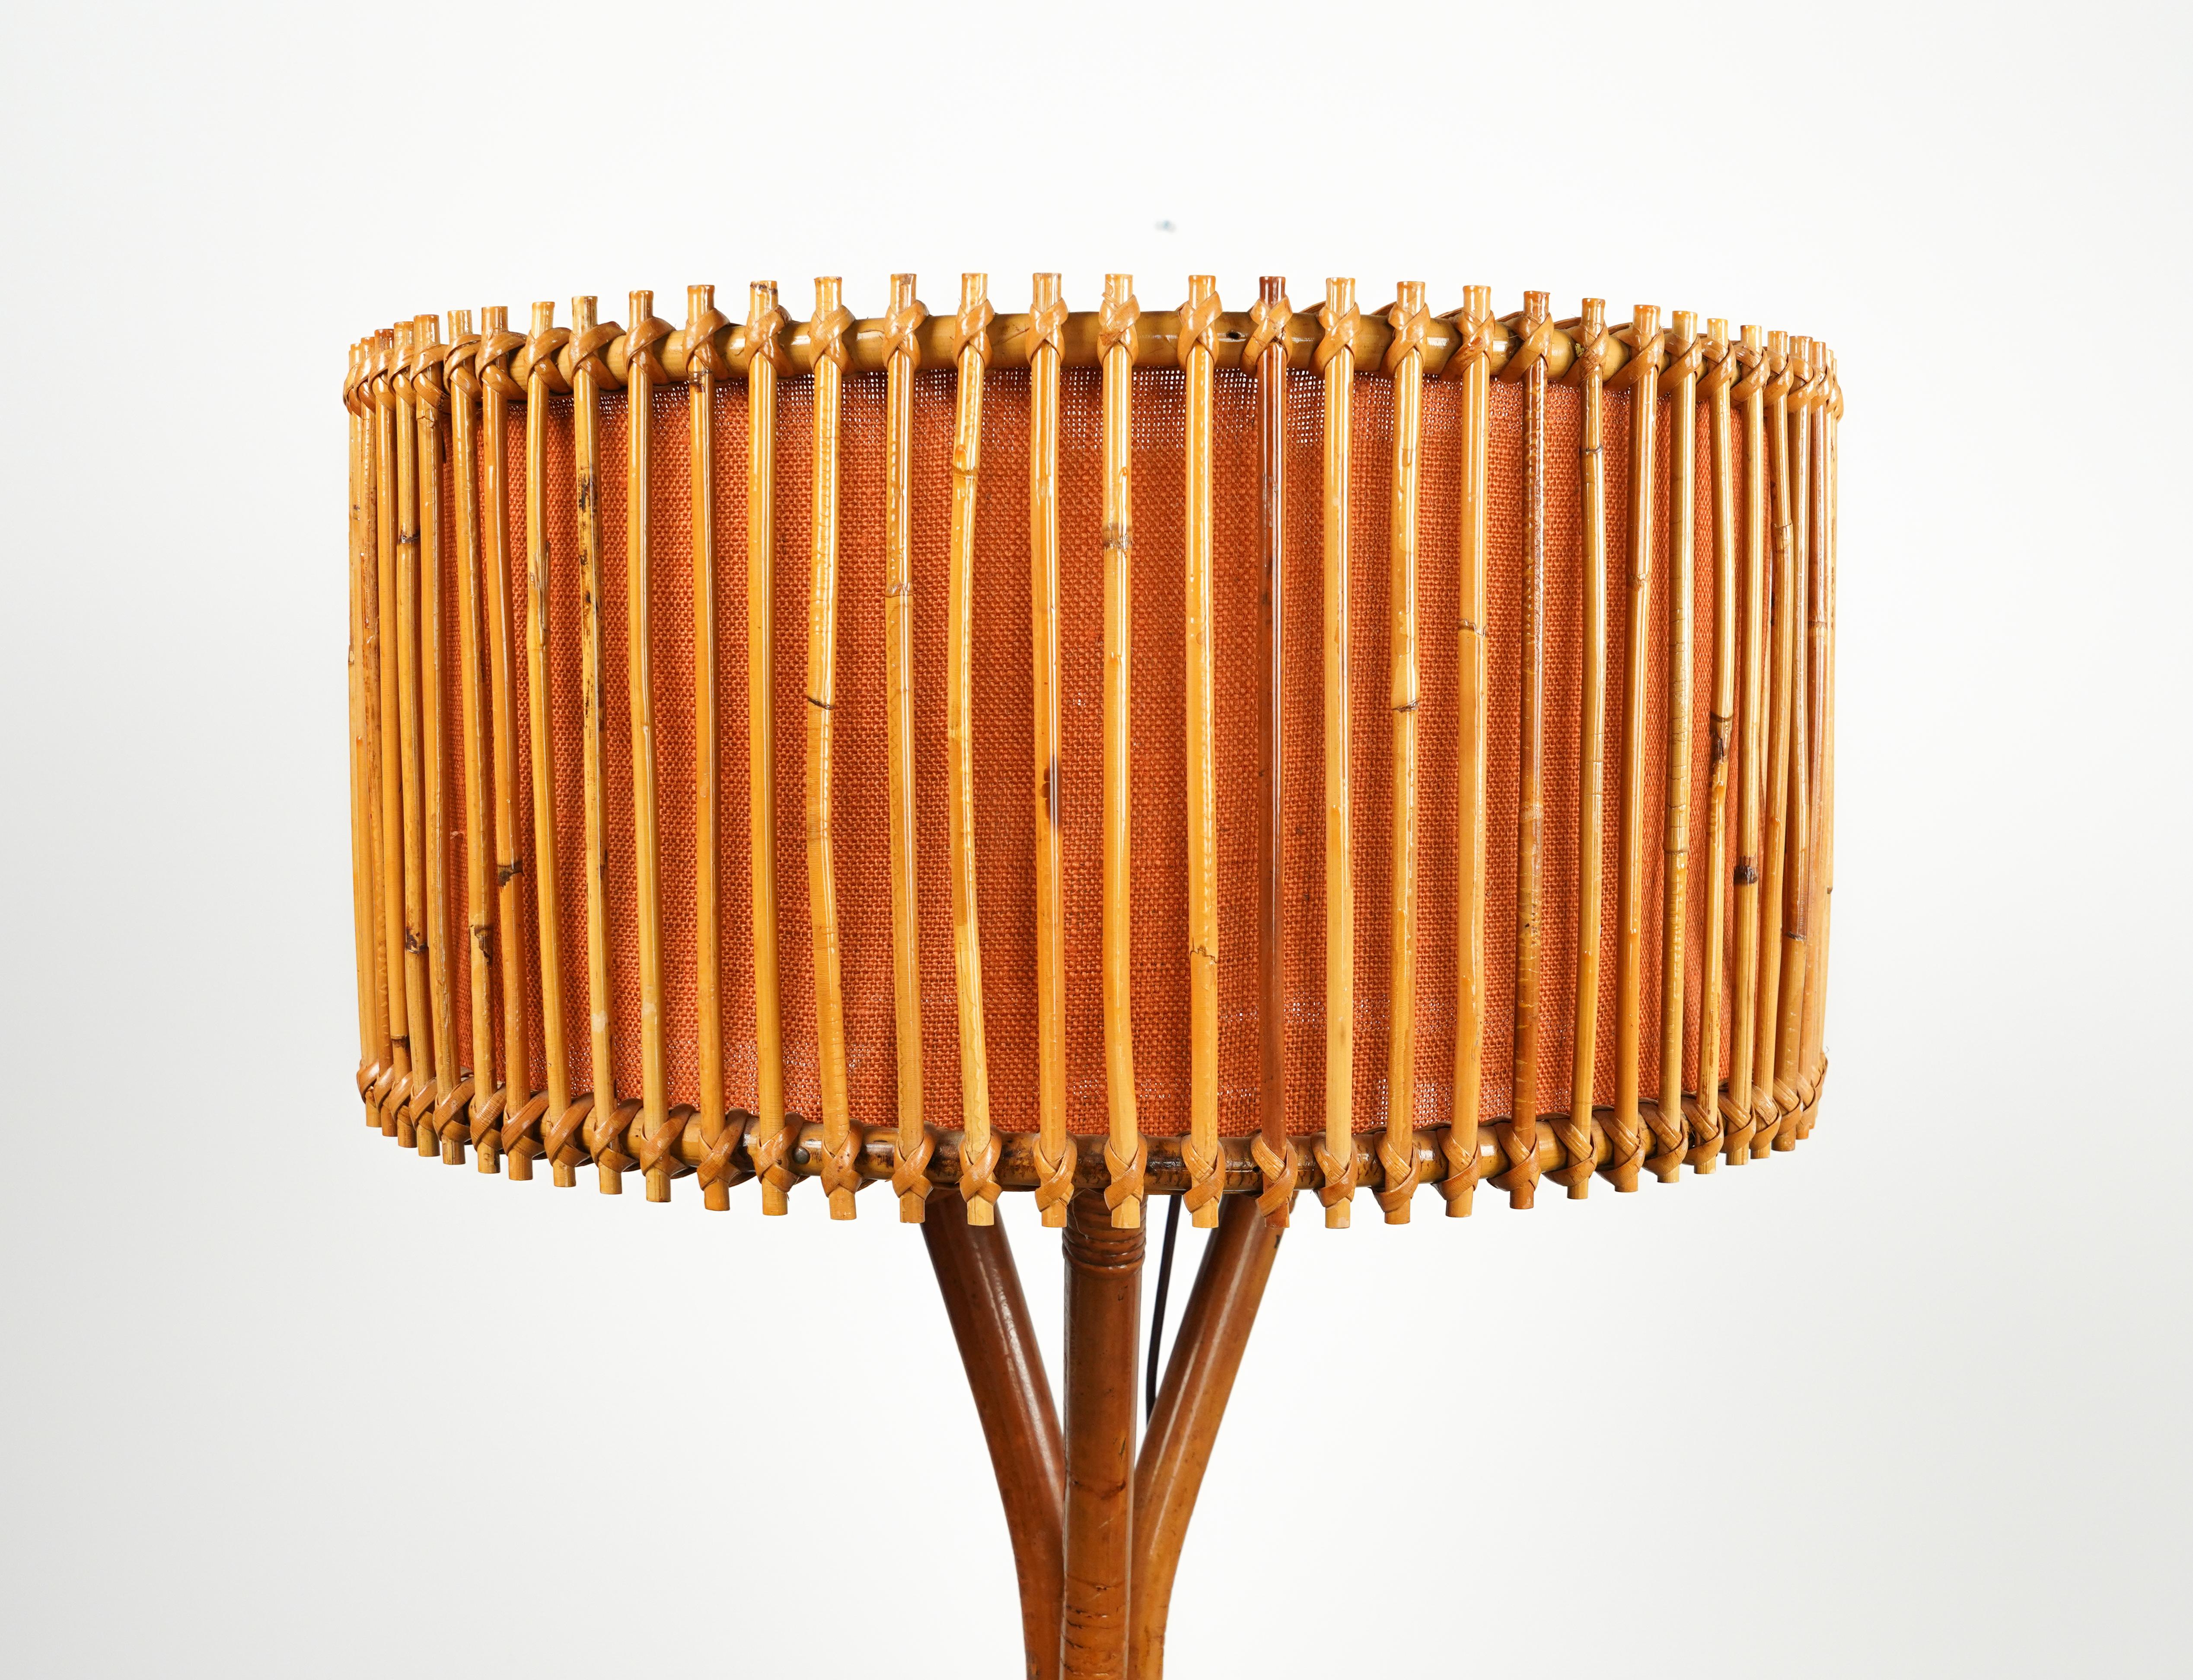 Midcentury Bamboo and Rattan Floor Lamp Franco Albini Style, Italy 1960s For Sale 2